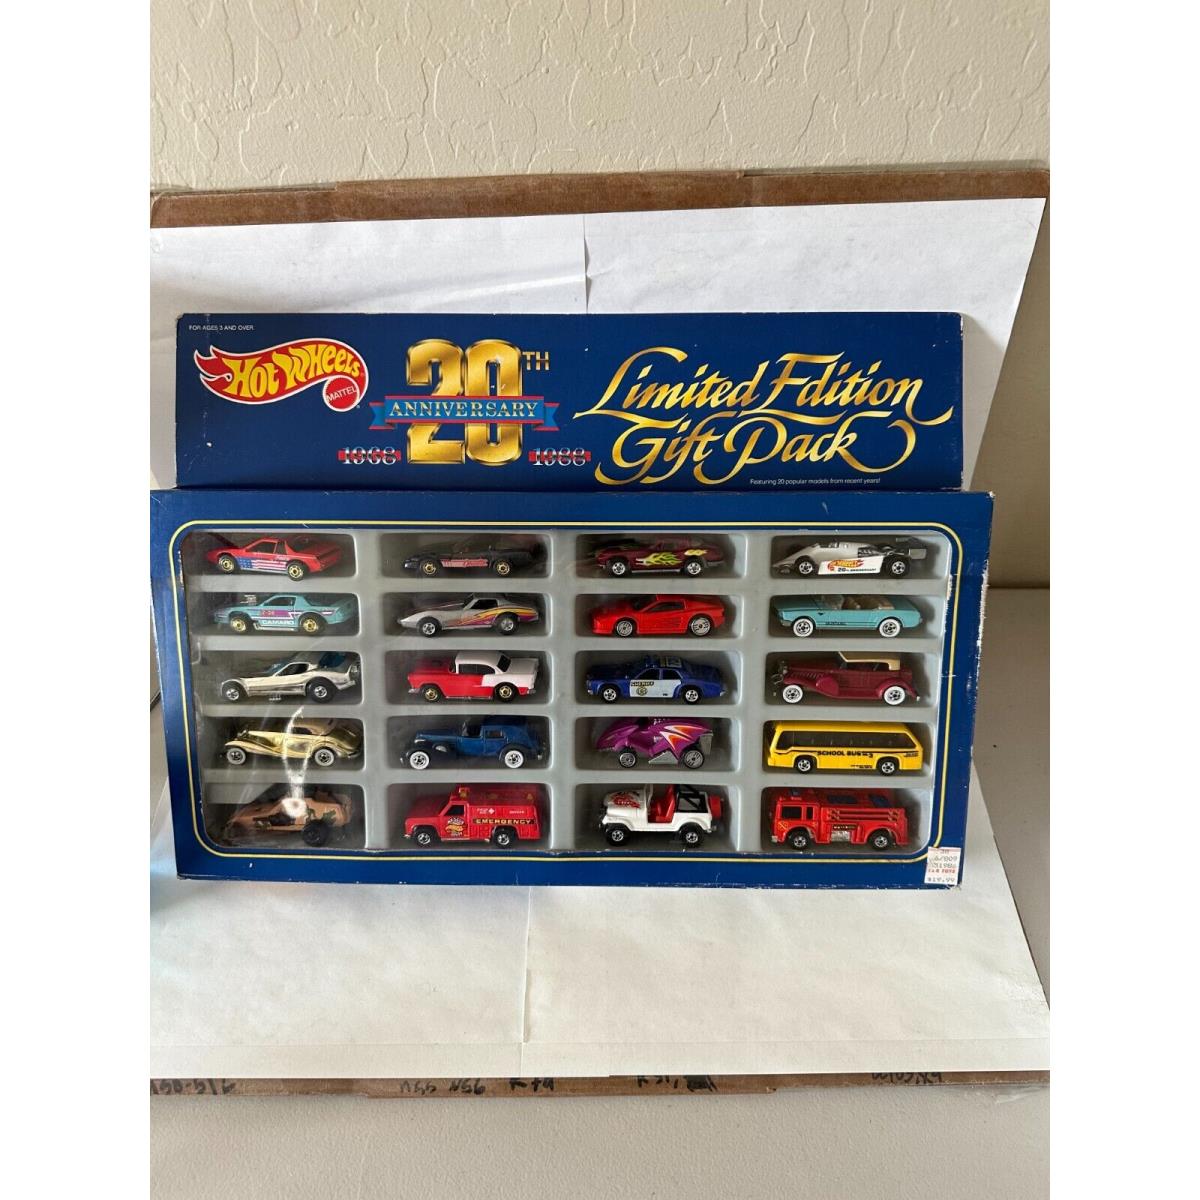 Hot Wheels 20th Anniversary Limited Edition Gift Pack 20 Car Set L46